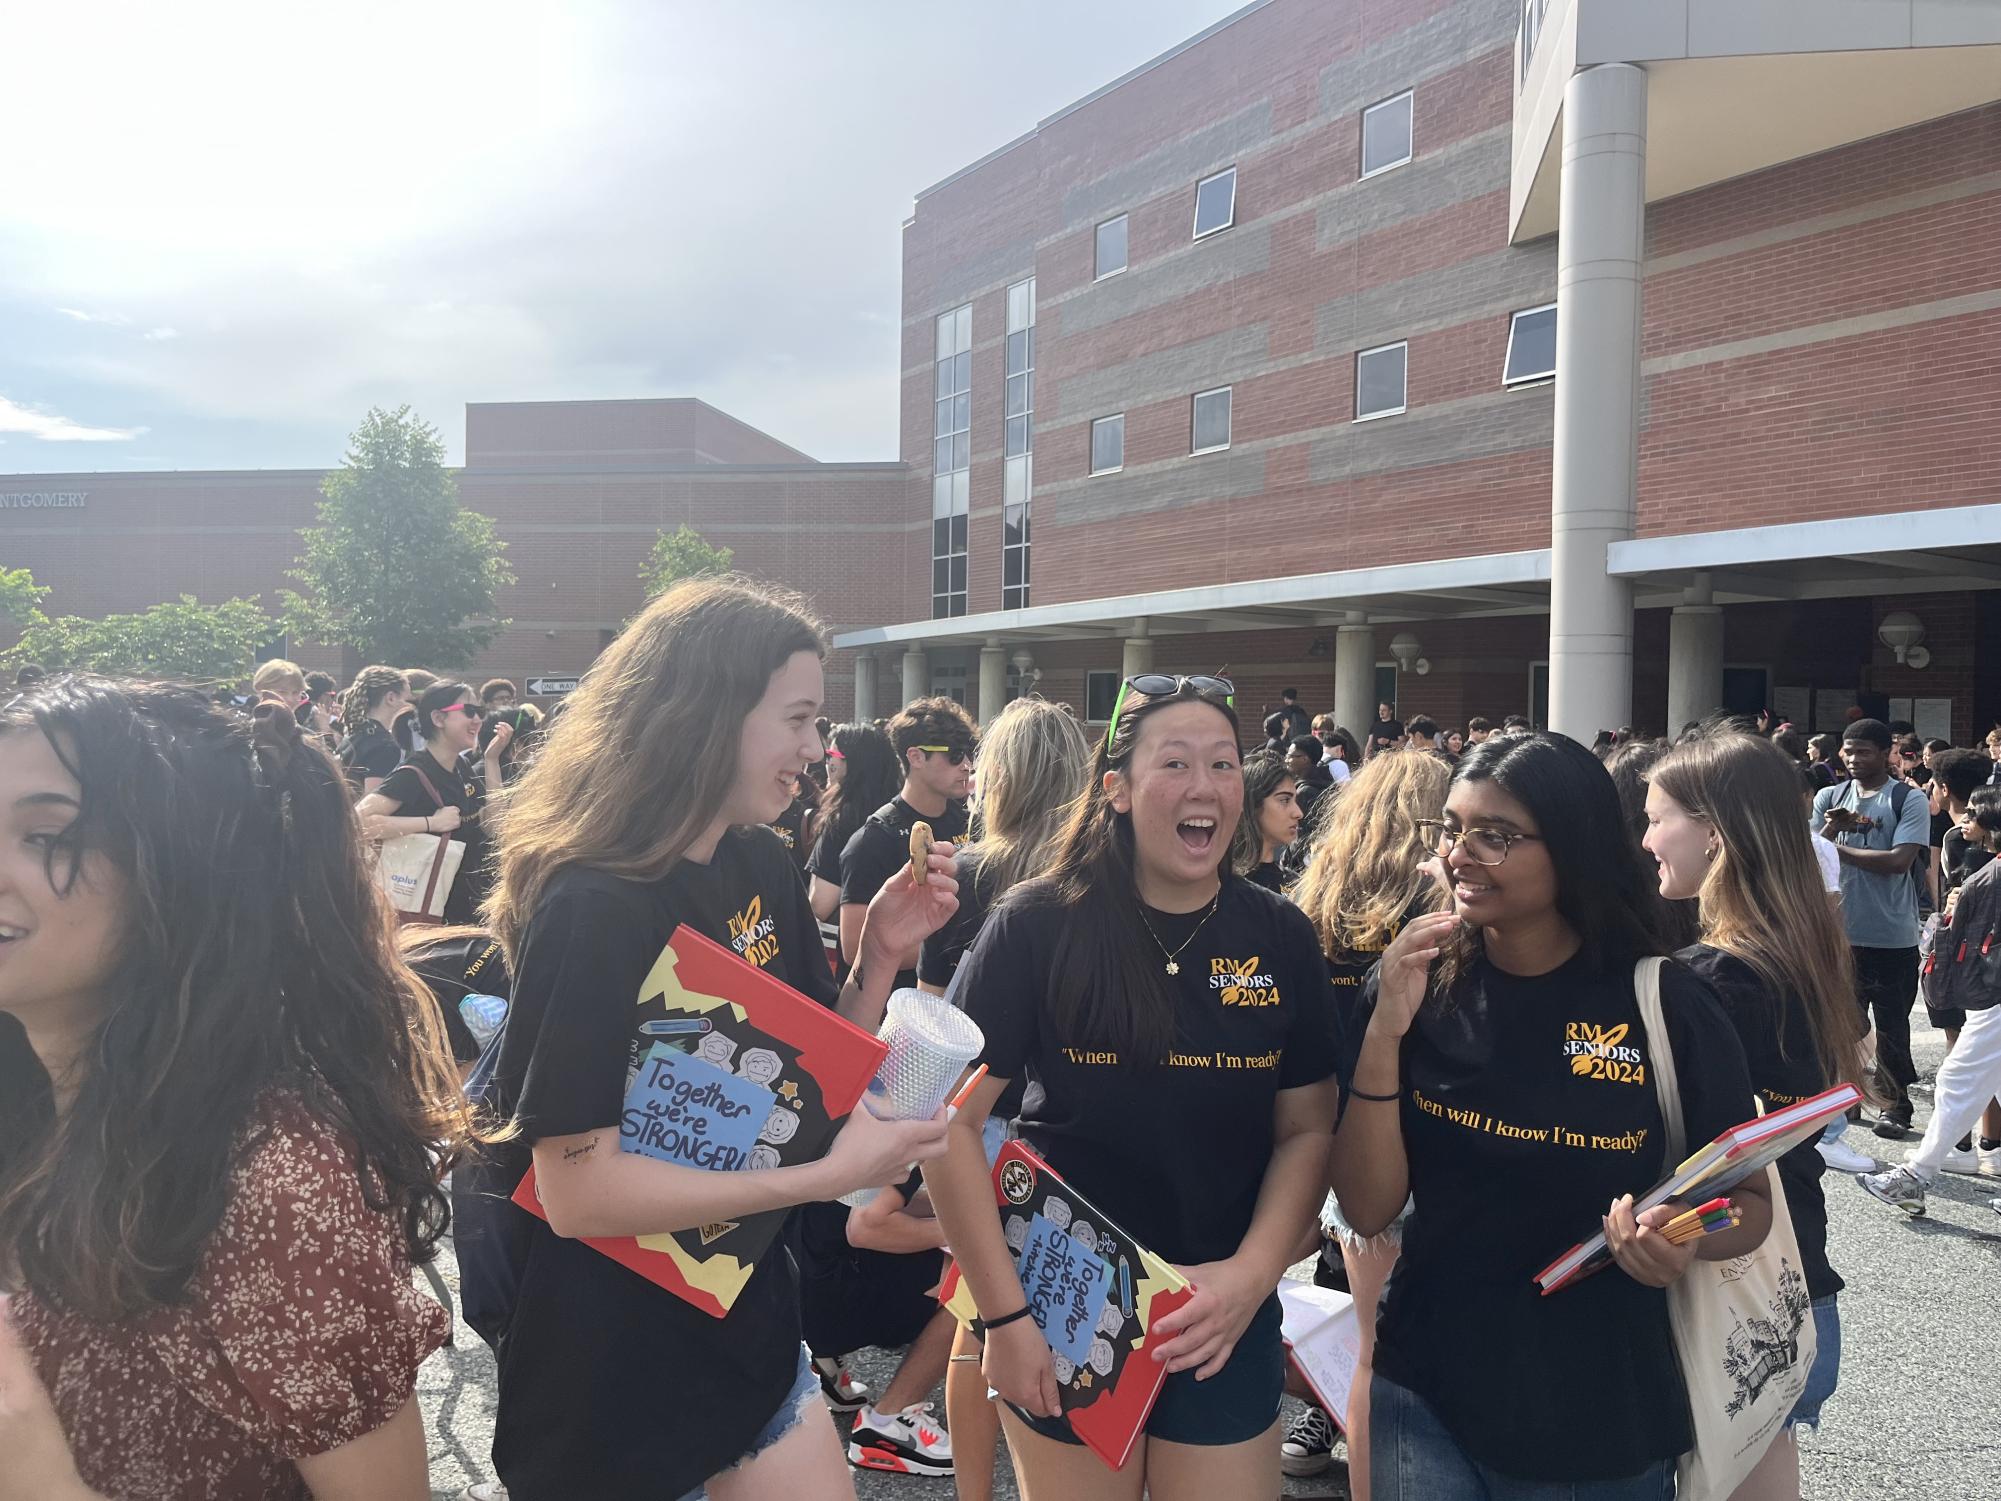 Seniors Gabby Mendelsohn, Ifrah Reyal and Pearl Mitchell laugh together during the Senior Sendoff on May 24. I will miss all the people and teachers at RM, Mendelsohn said. But I am excited for the summer and college.